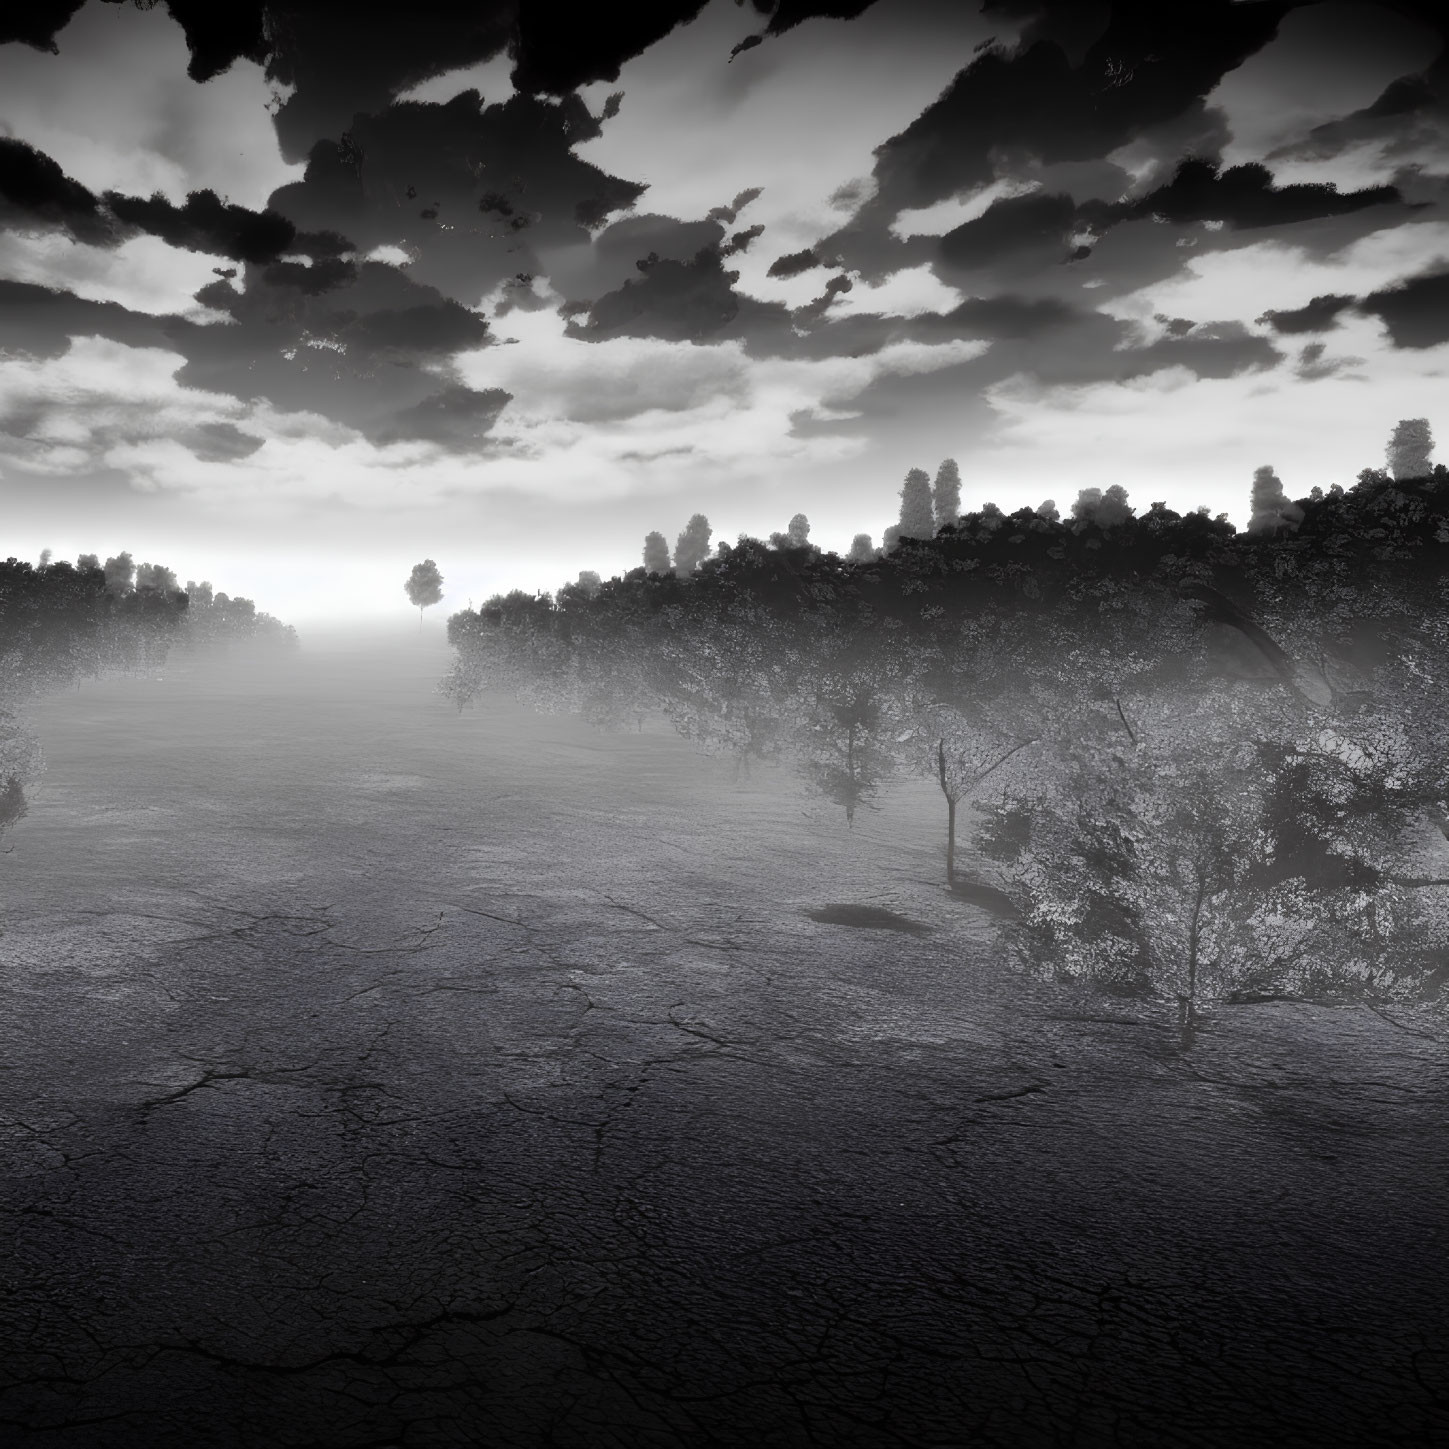 Monochrome landscape with cracked earth, sparse trees, and dramatic cloudy sky